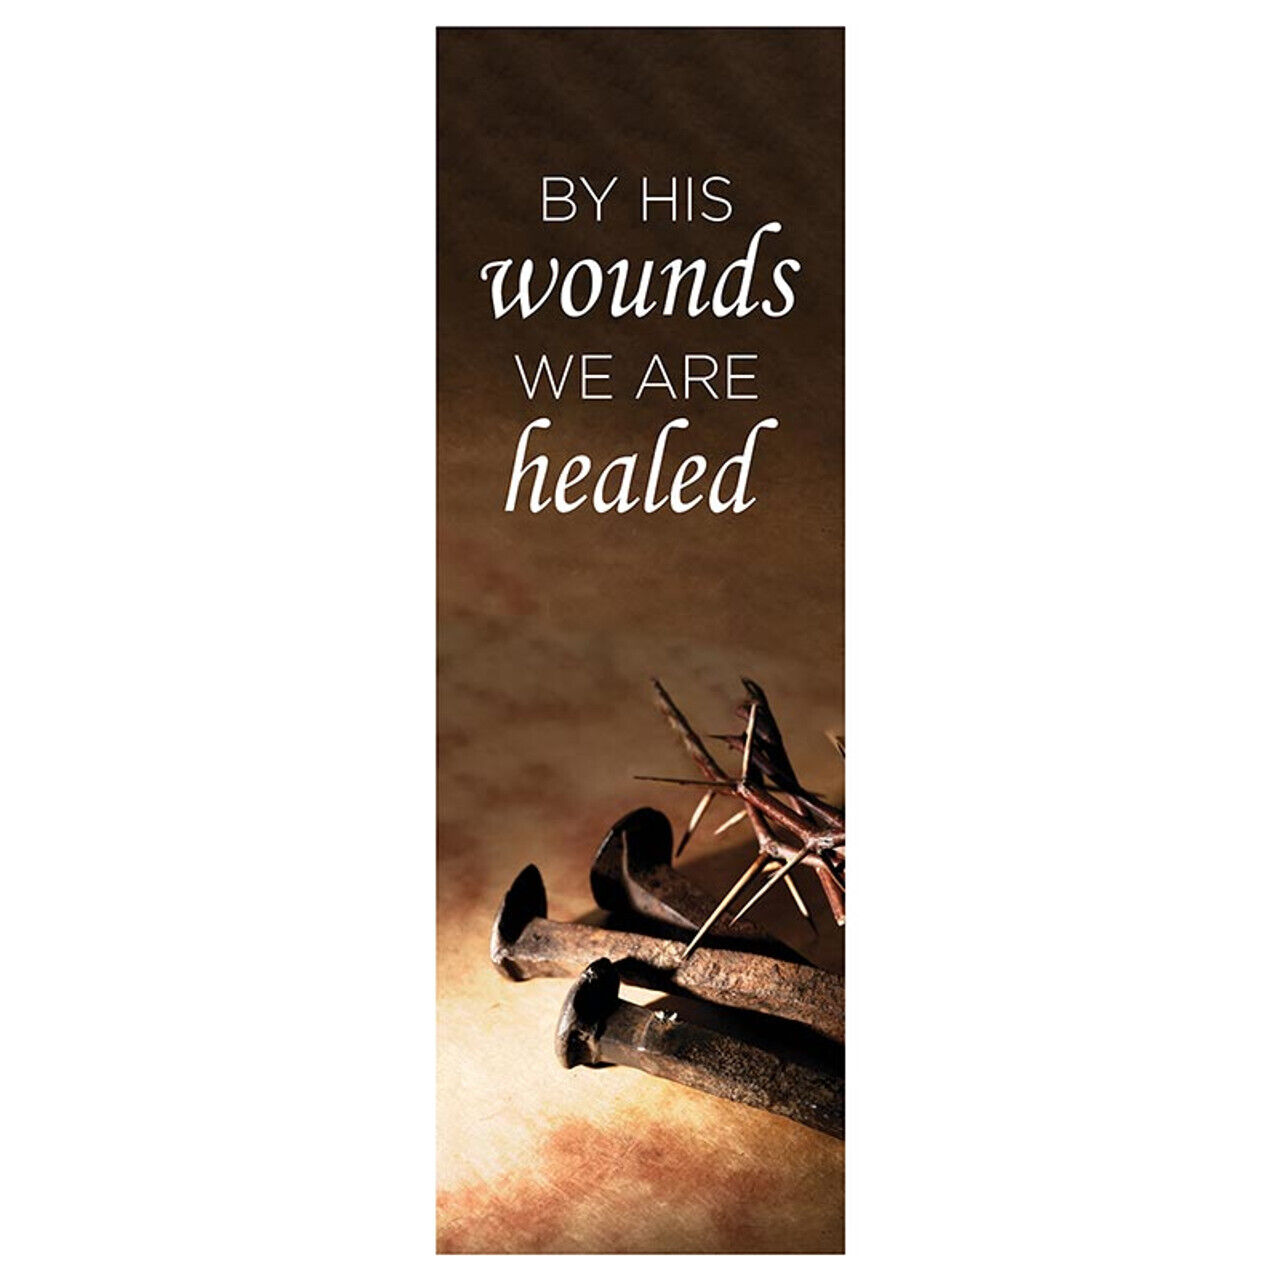 Inspirational Christian Church Banners 2x6ft By His Wounds We Are Healed Banner